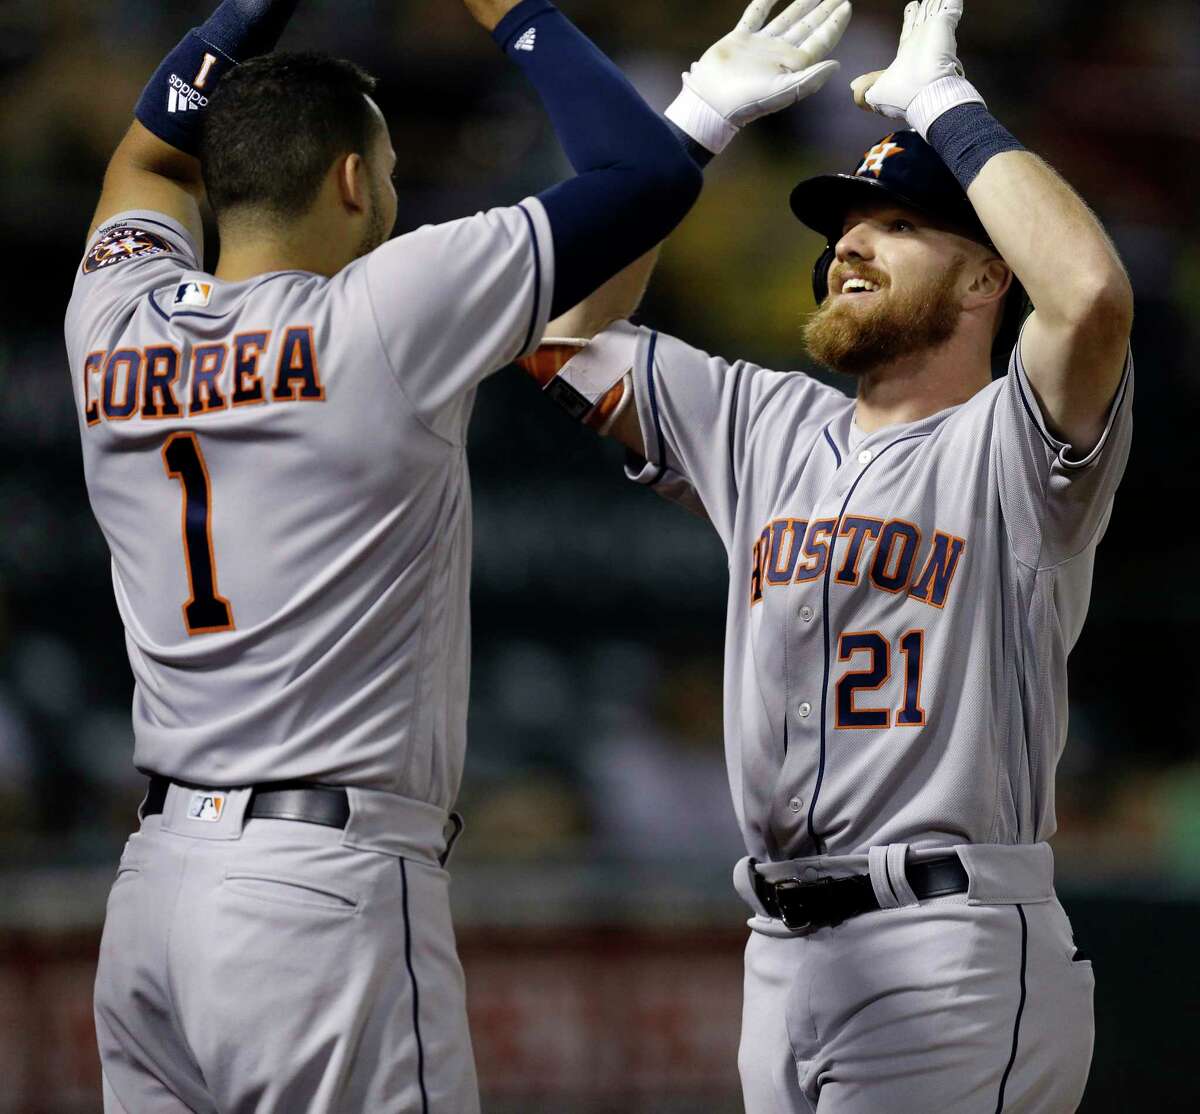 Houston Astros' Derek Fisher right, celebrates with Carlos Correa (1) after hitting a home run off Oakland Athletics' Josh Smith in the ninth inning of a baseball game Monday, June 19, 2017, in Oakland, Calif. (AP Photo/Ben Margot)